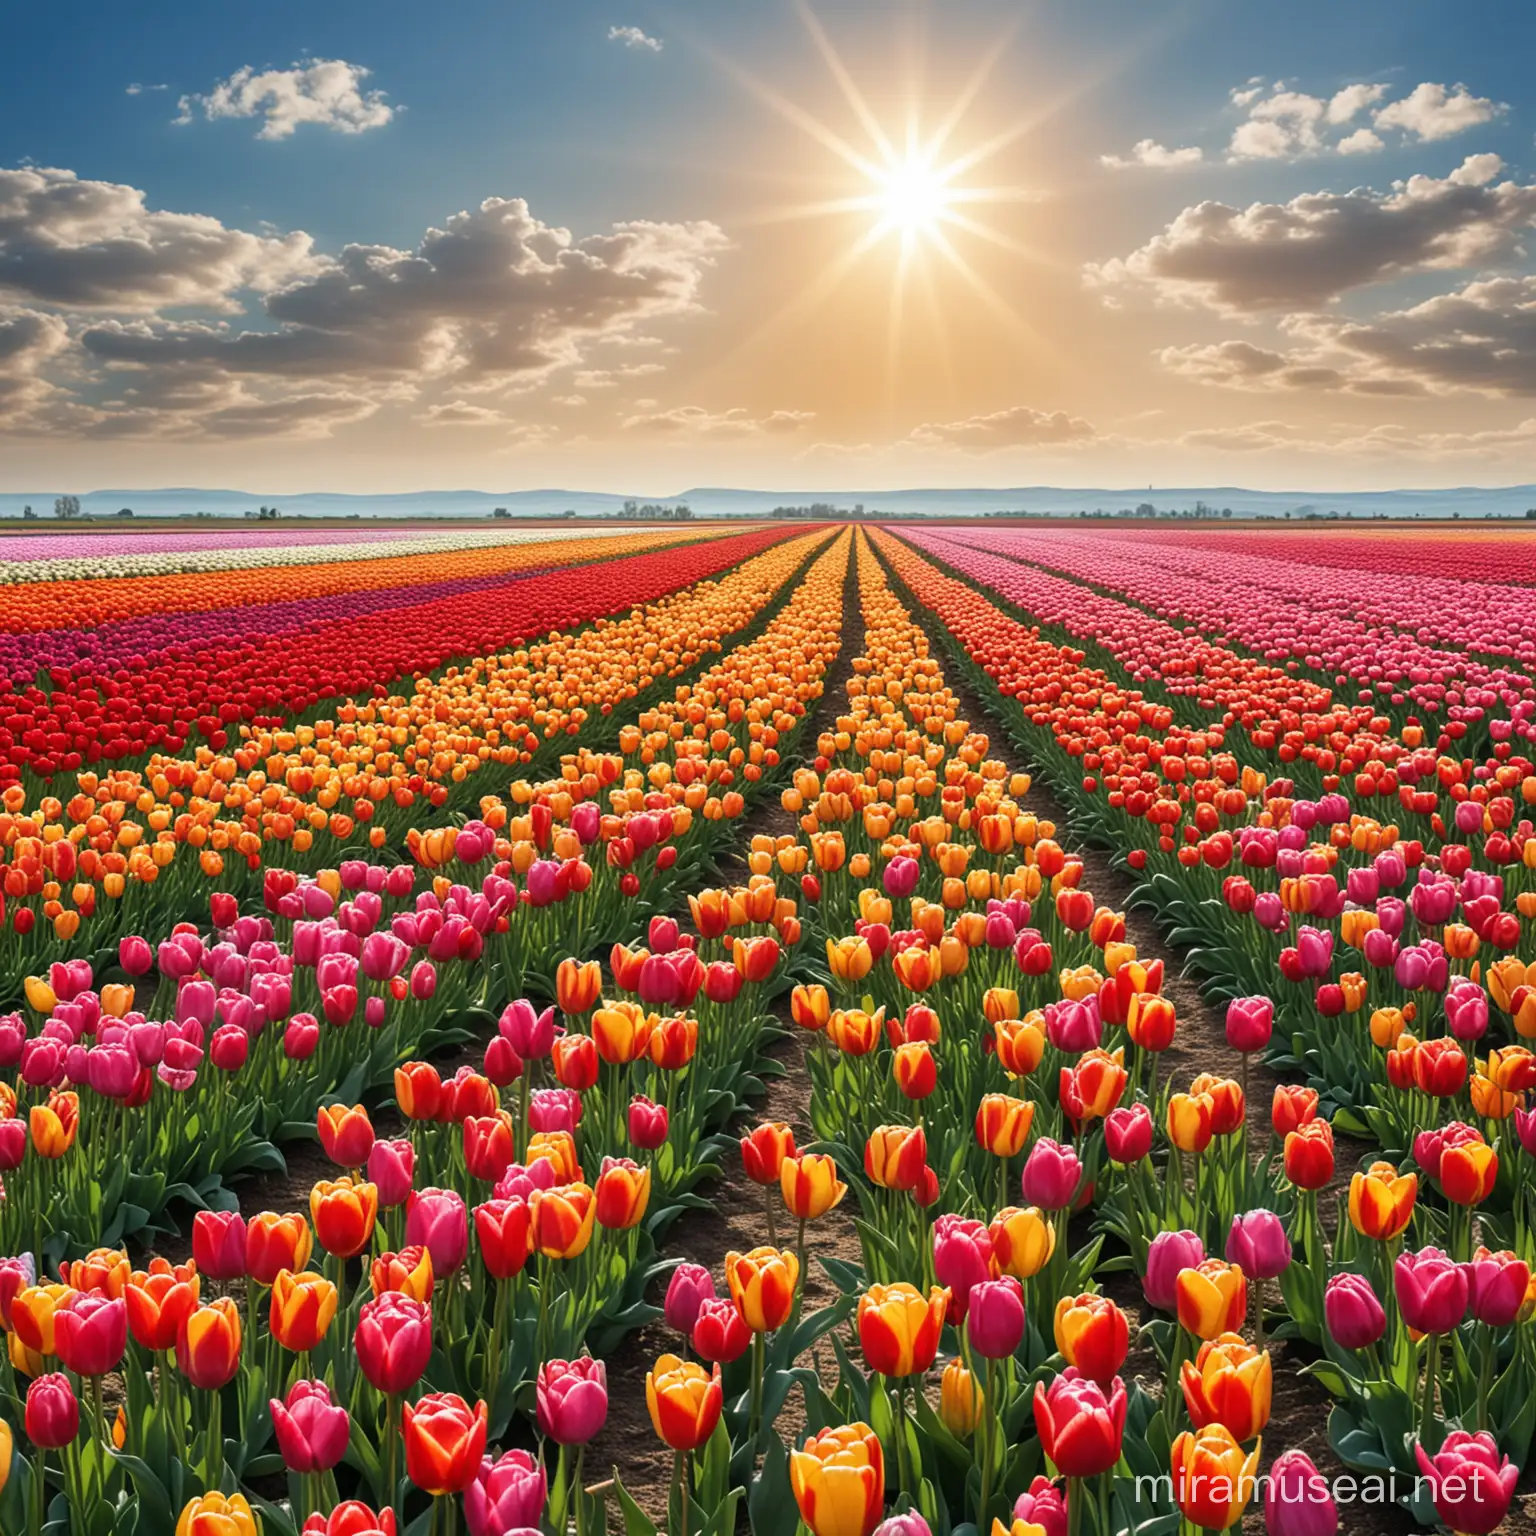 Vibrant Field of Multicolored Tulips Under Sunny Sky with Female Angel